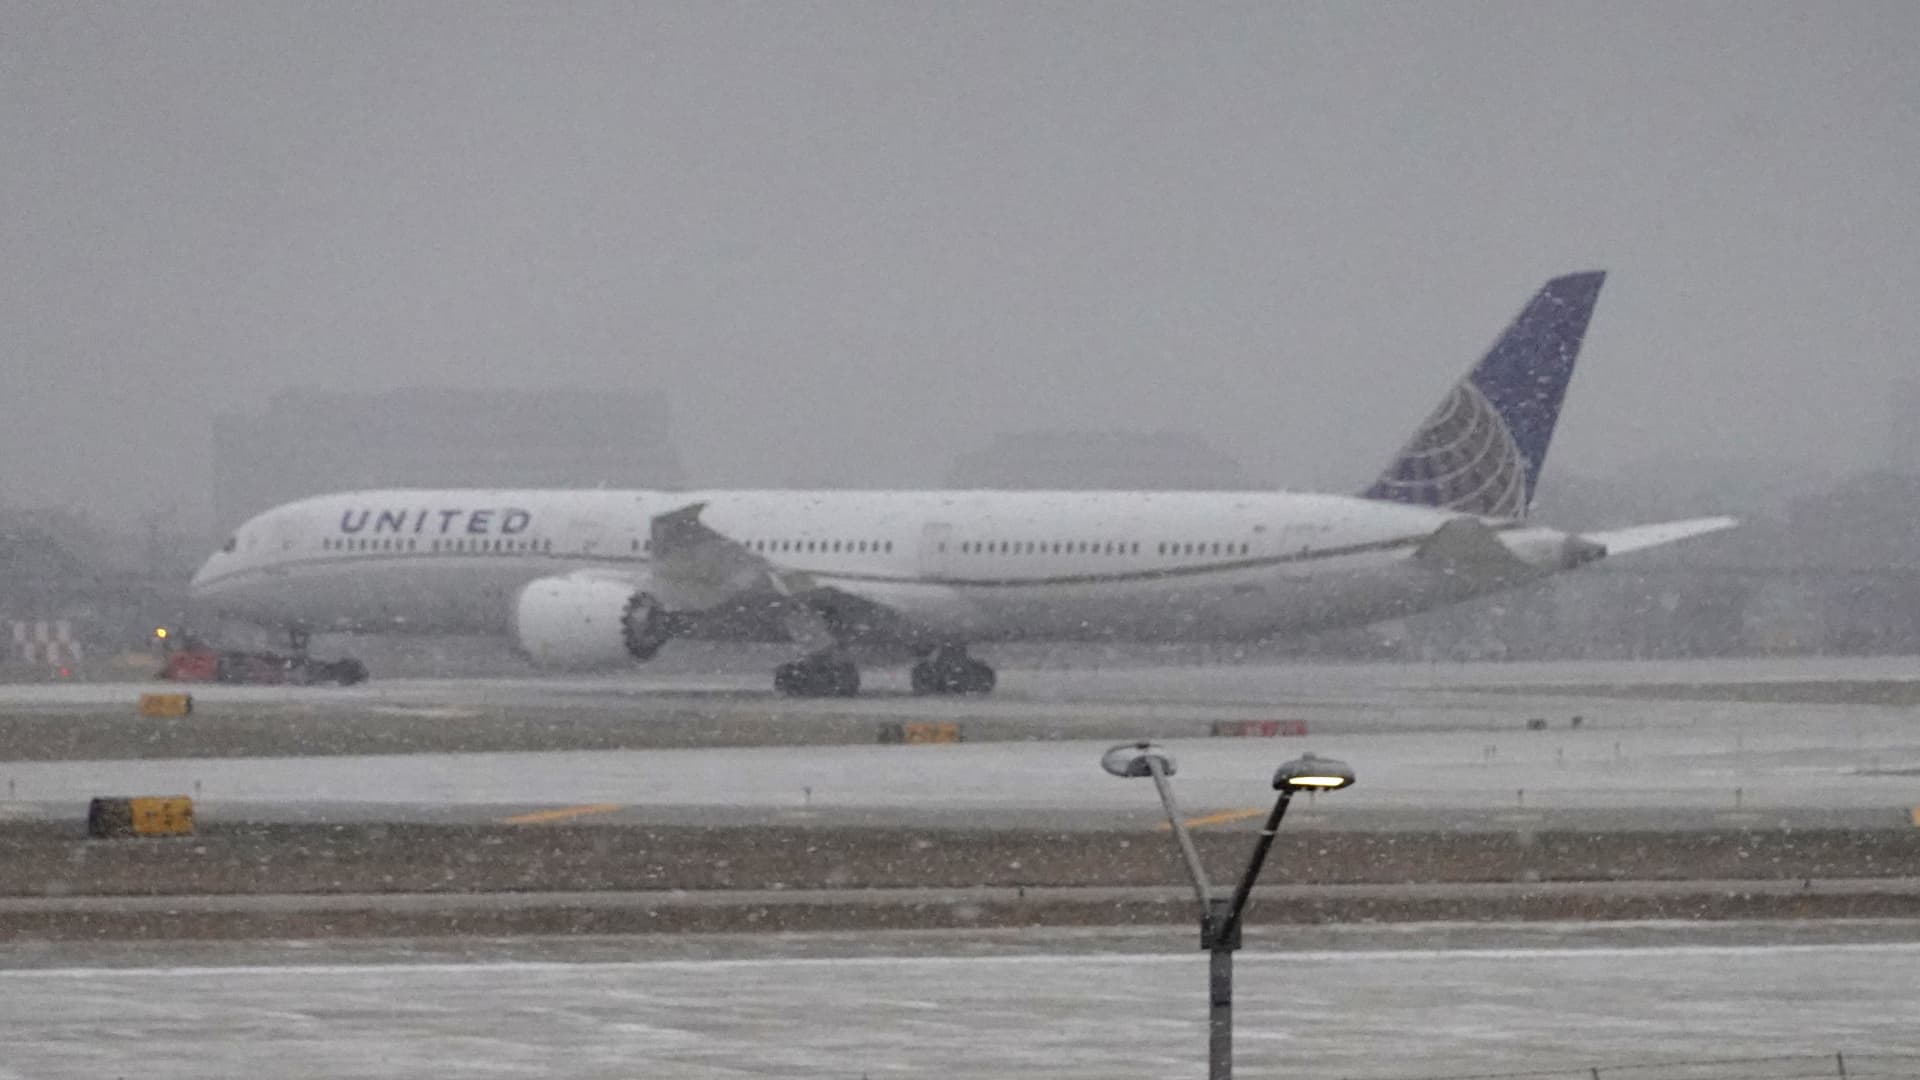 A jet taxis in snow at O'Hare International Airport on December 22, 2022 in Chicago, Illinois.